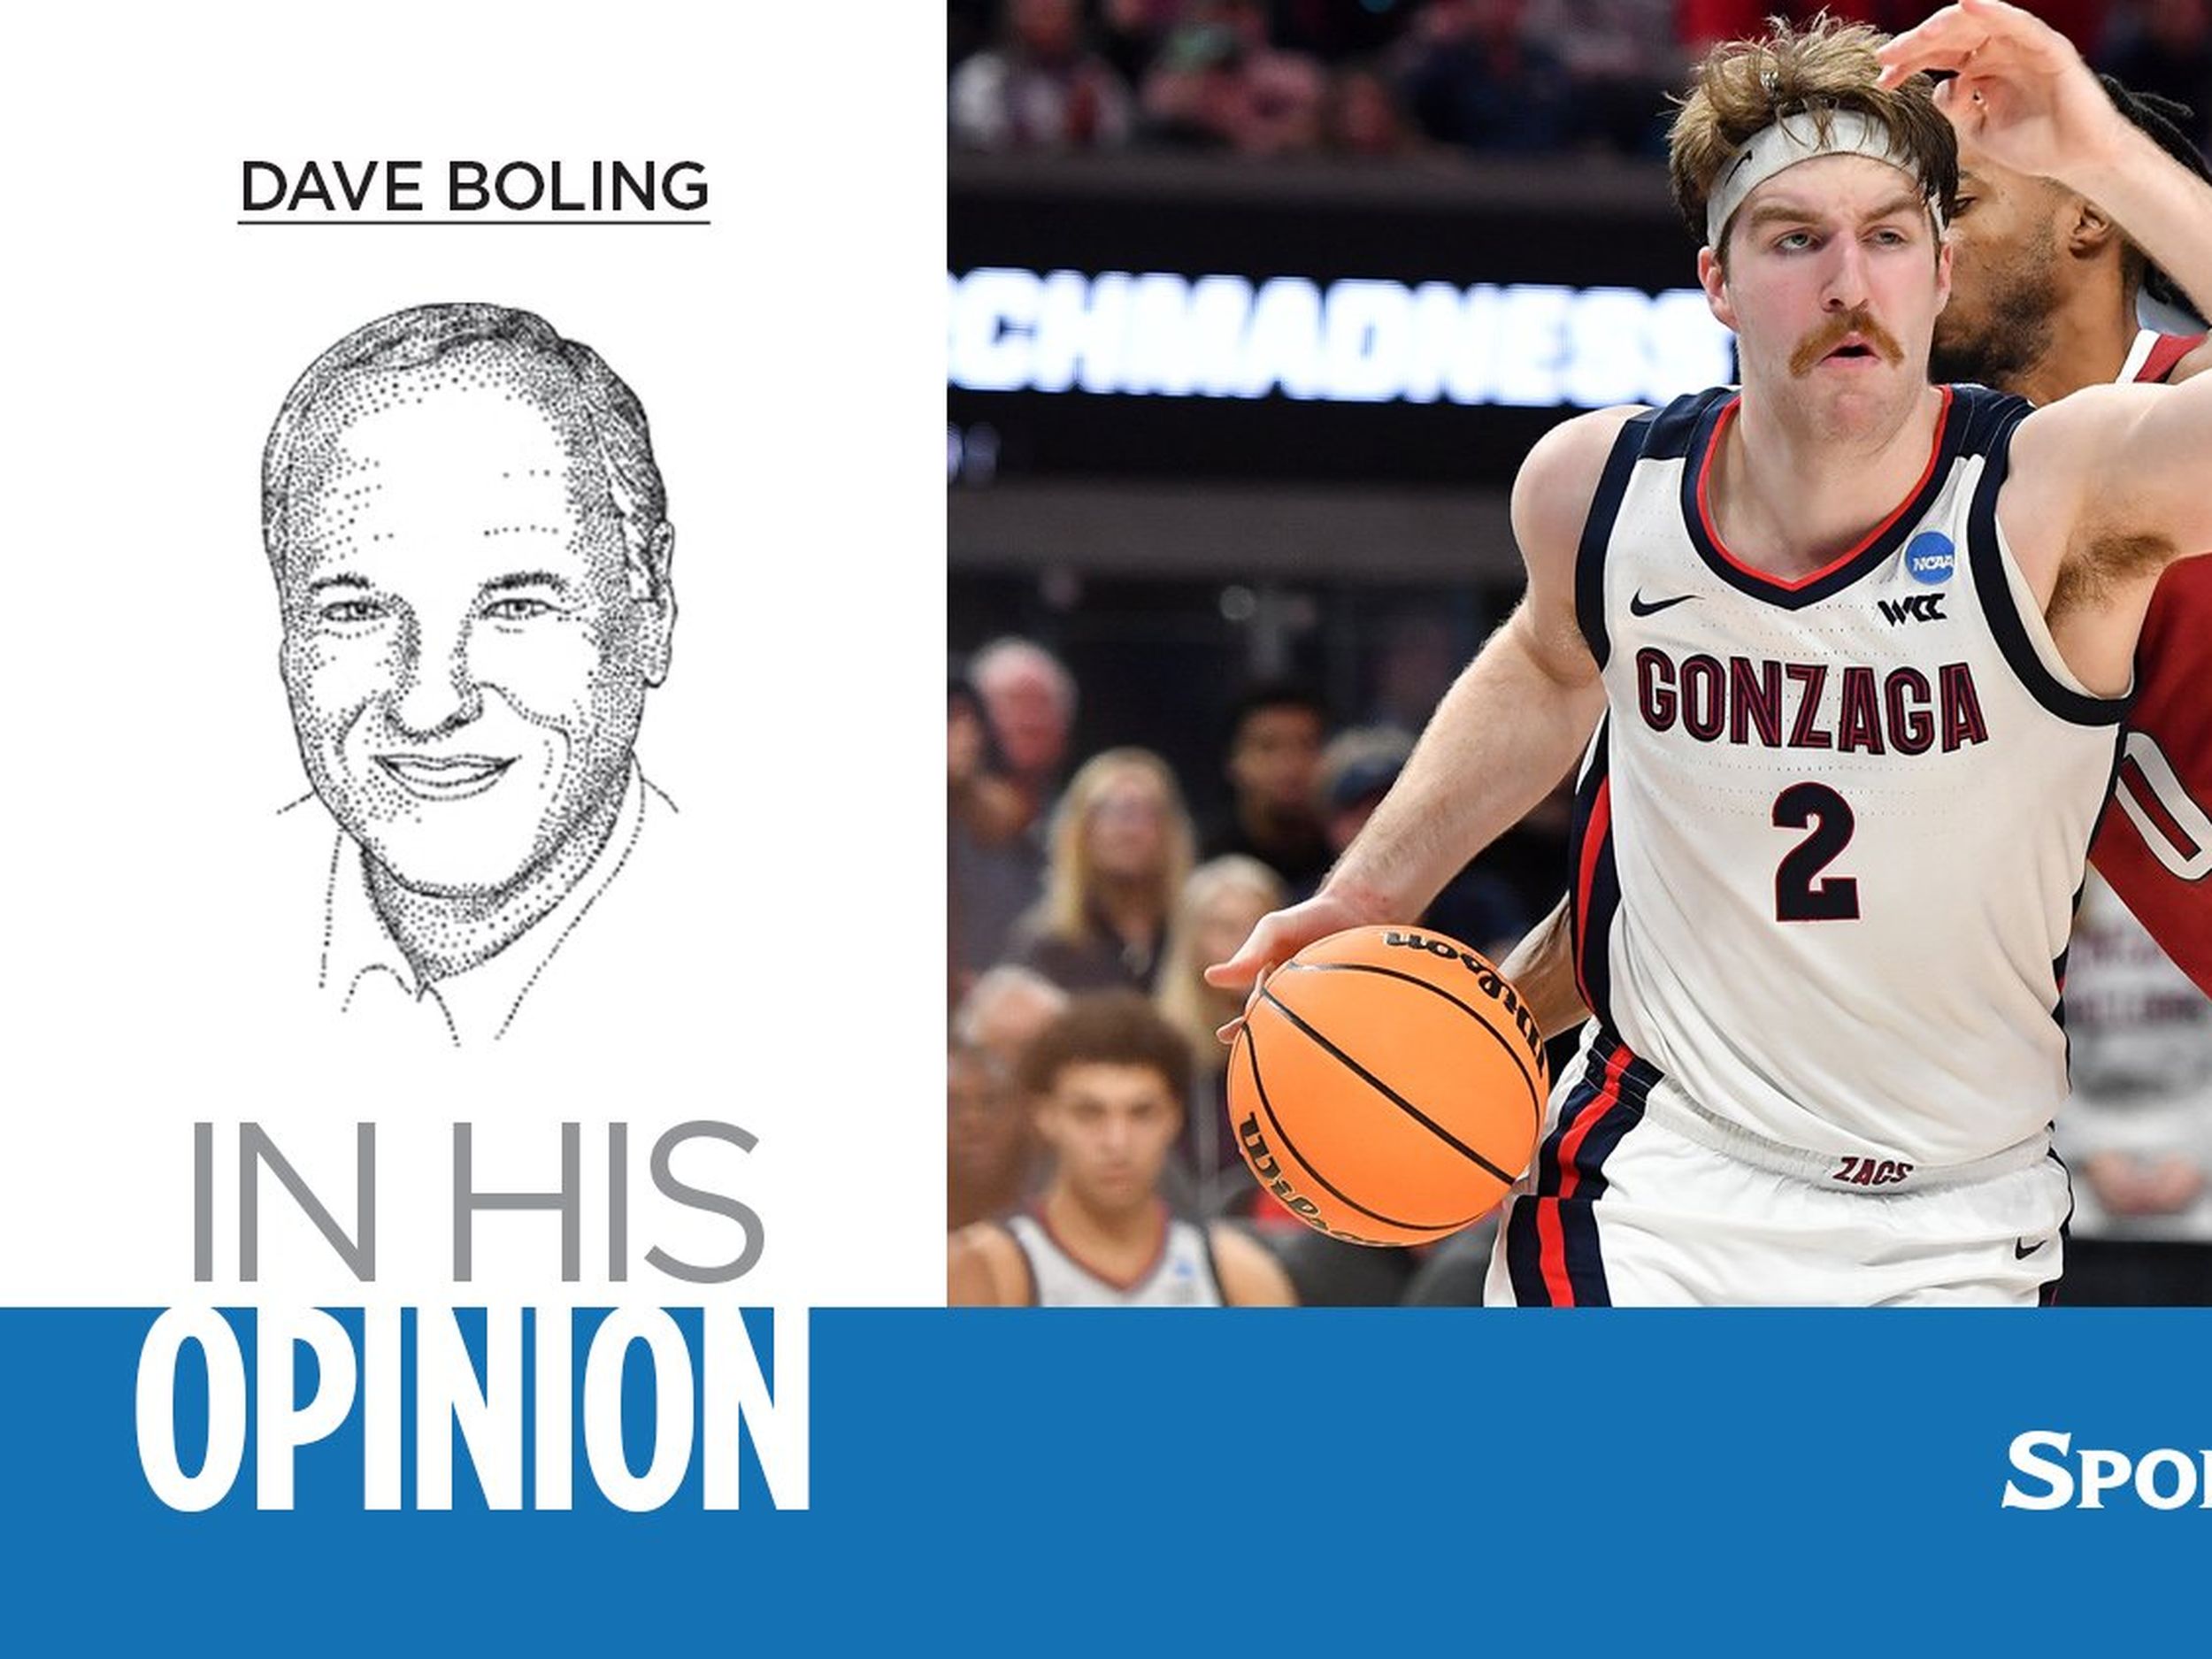 He's just a Zag, man:' The untold stories of Drew Timme's singular,  legendary Gonzaga career 